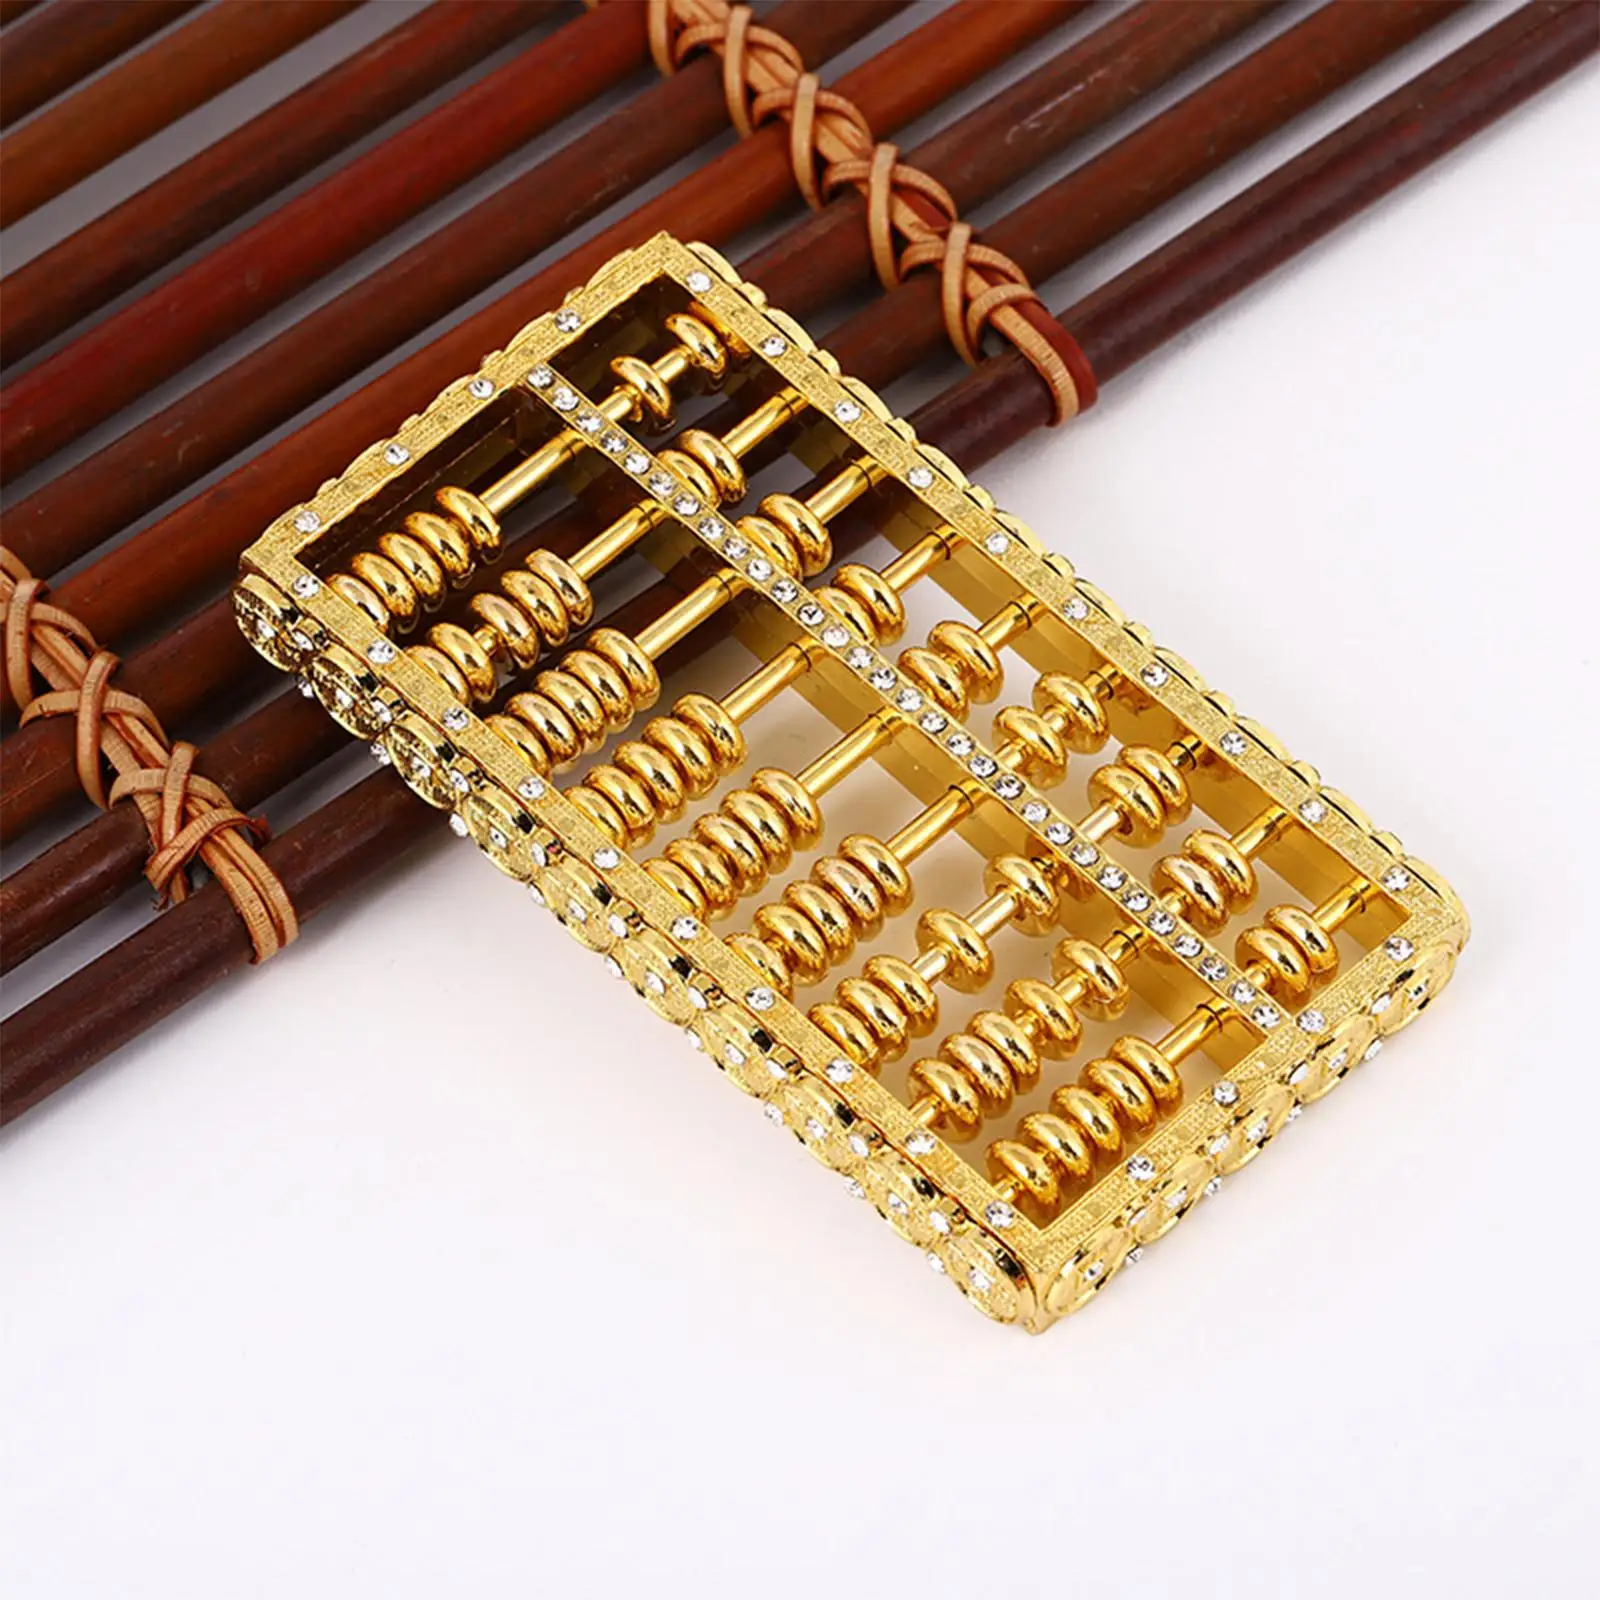 Fashion Abacus Decoration Maths Learning Toy Educational Counting Bead Abacus for Jewelry Making Accessory DIY Desktop Decor